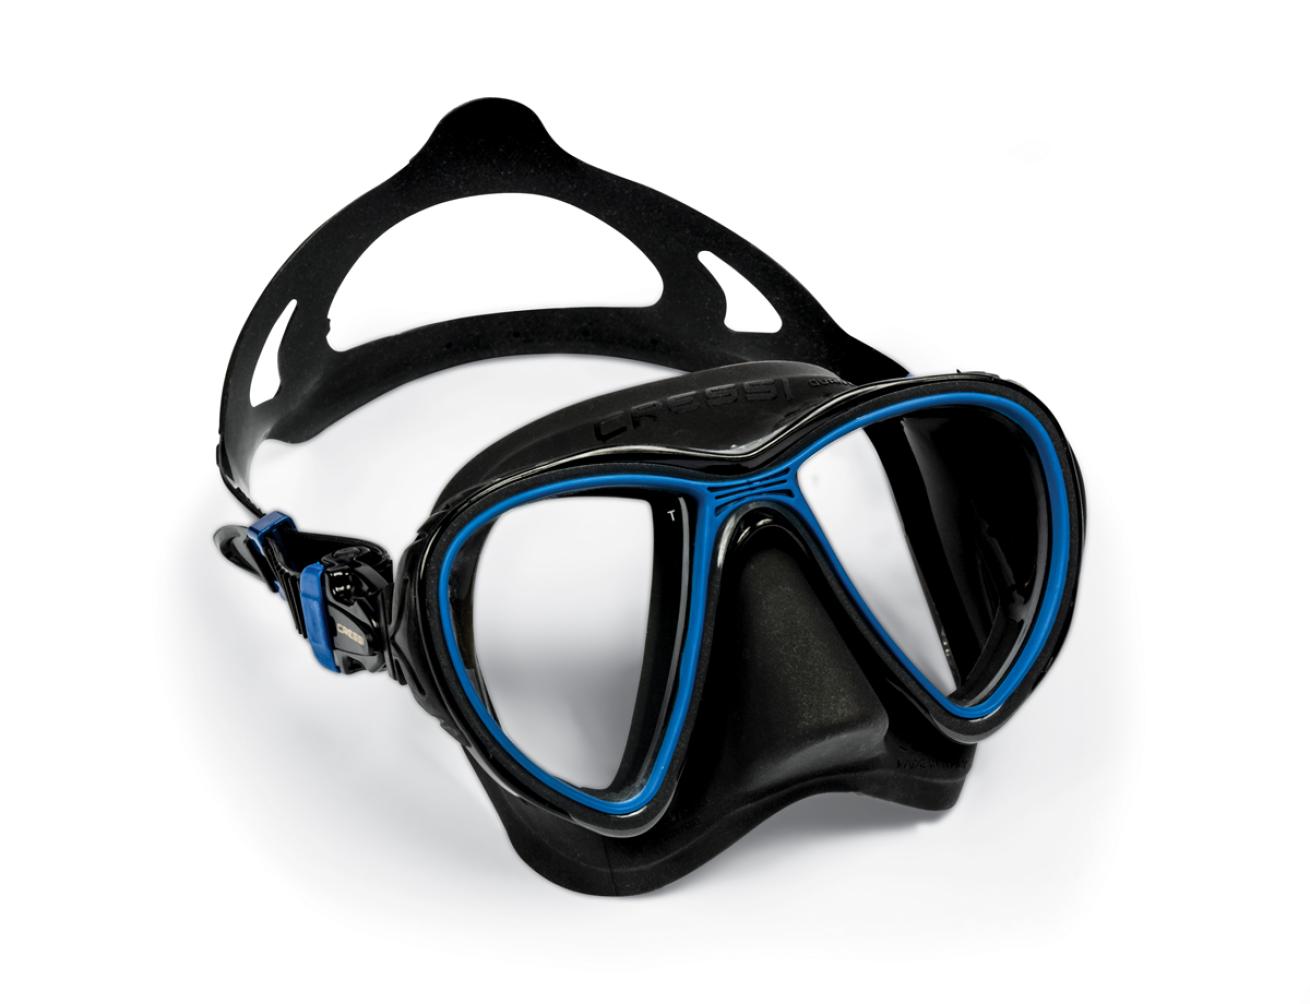 Cressi Liberty Duo Perfect View Scuba Diving and Snorkeling Mask